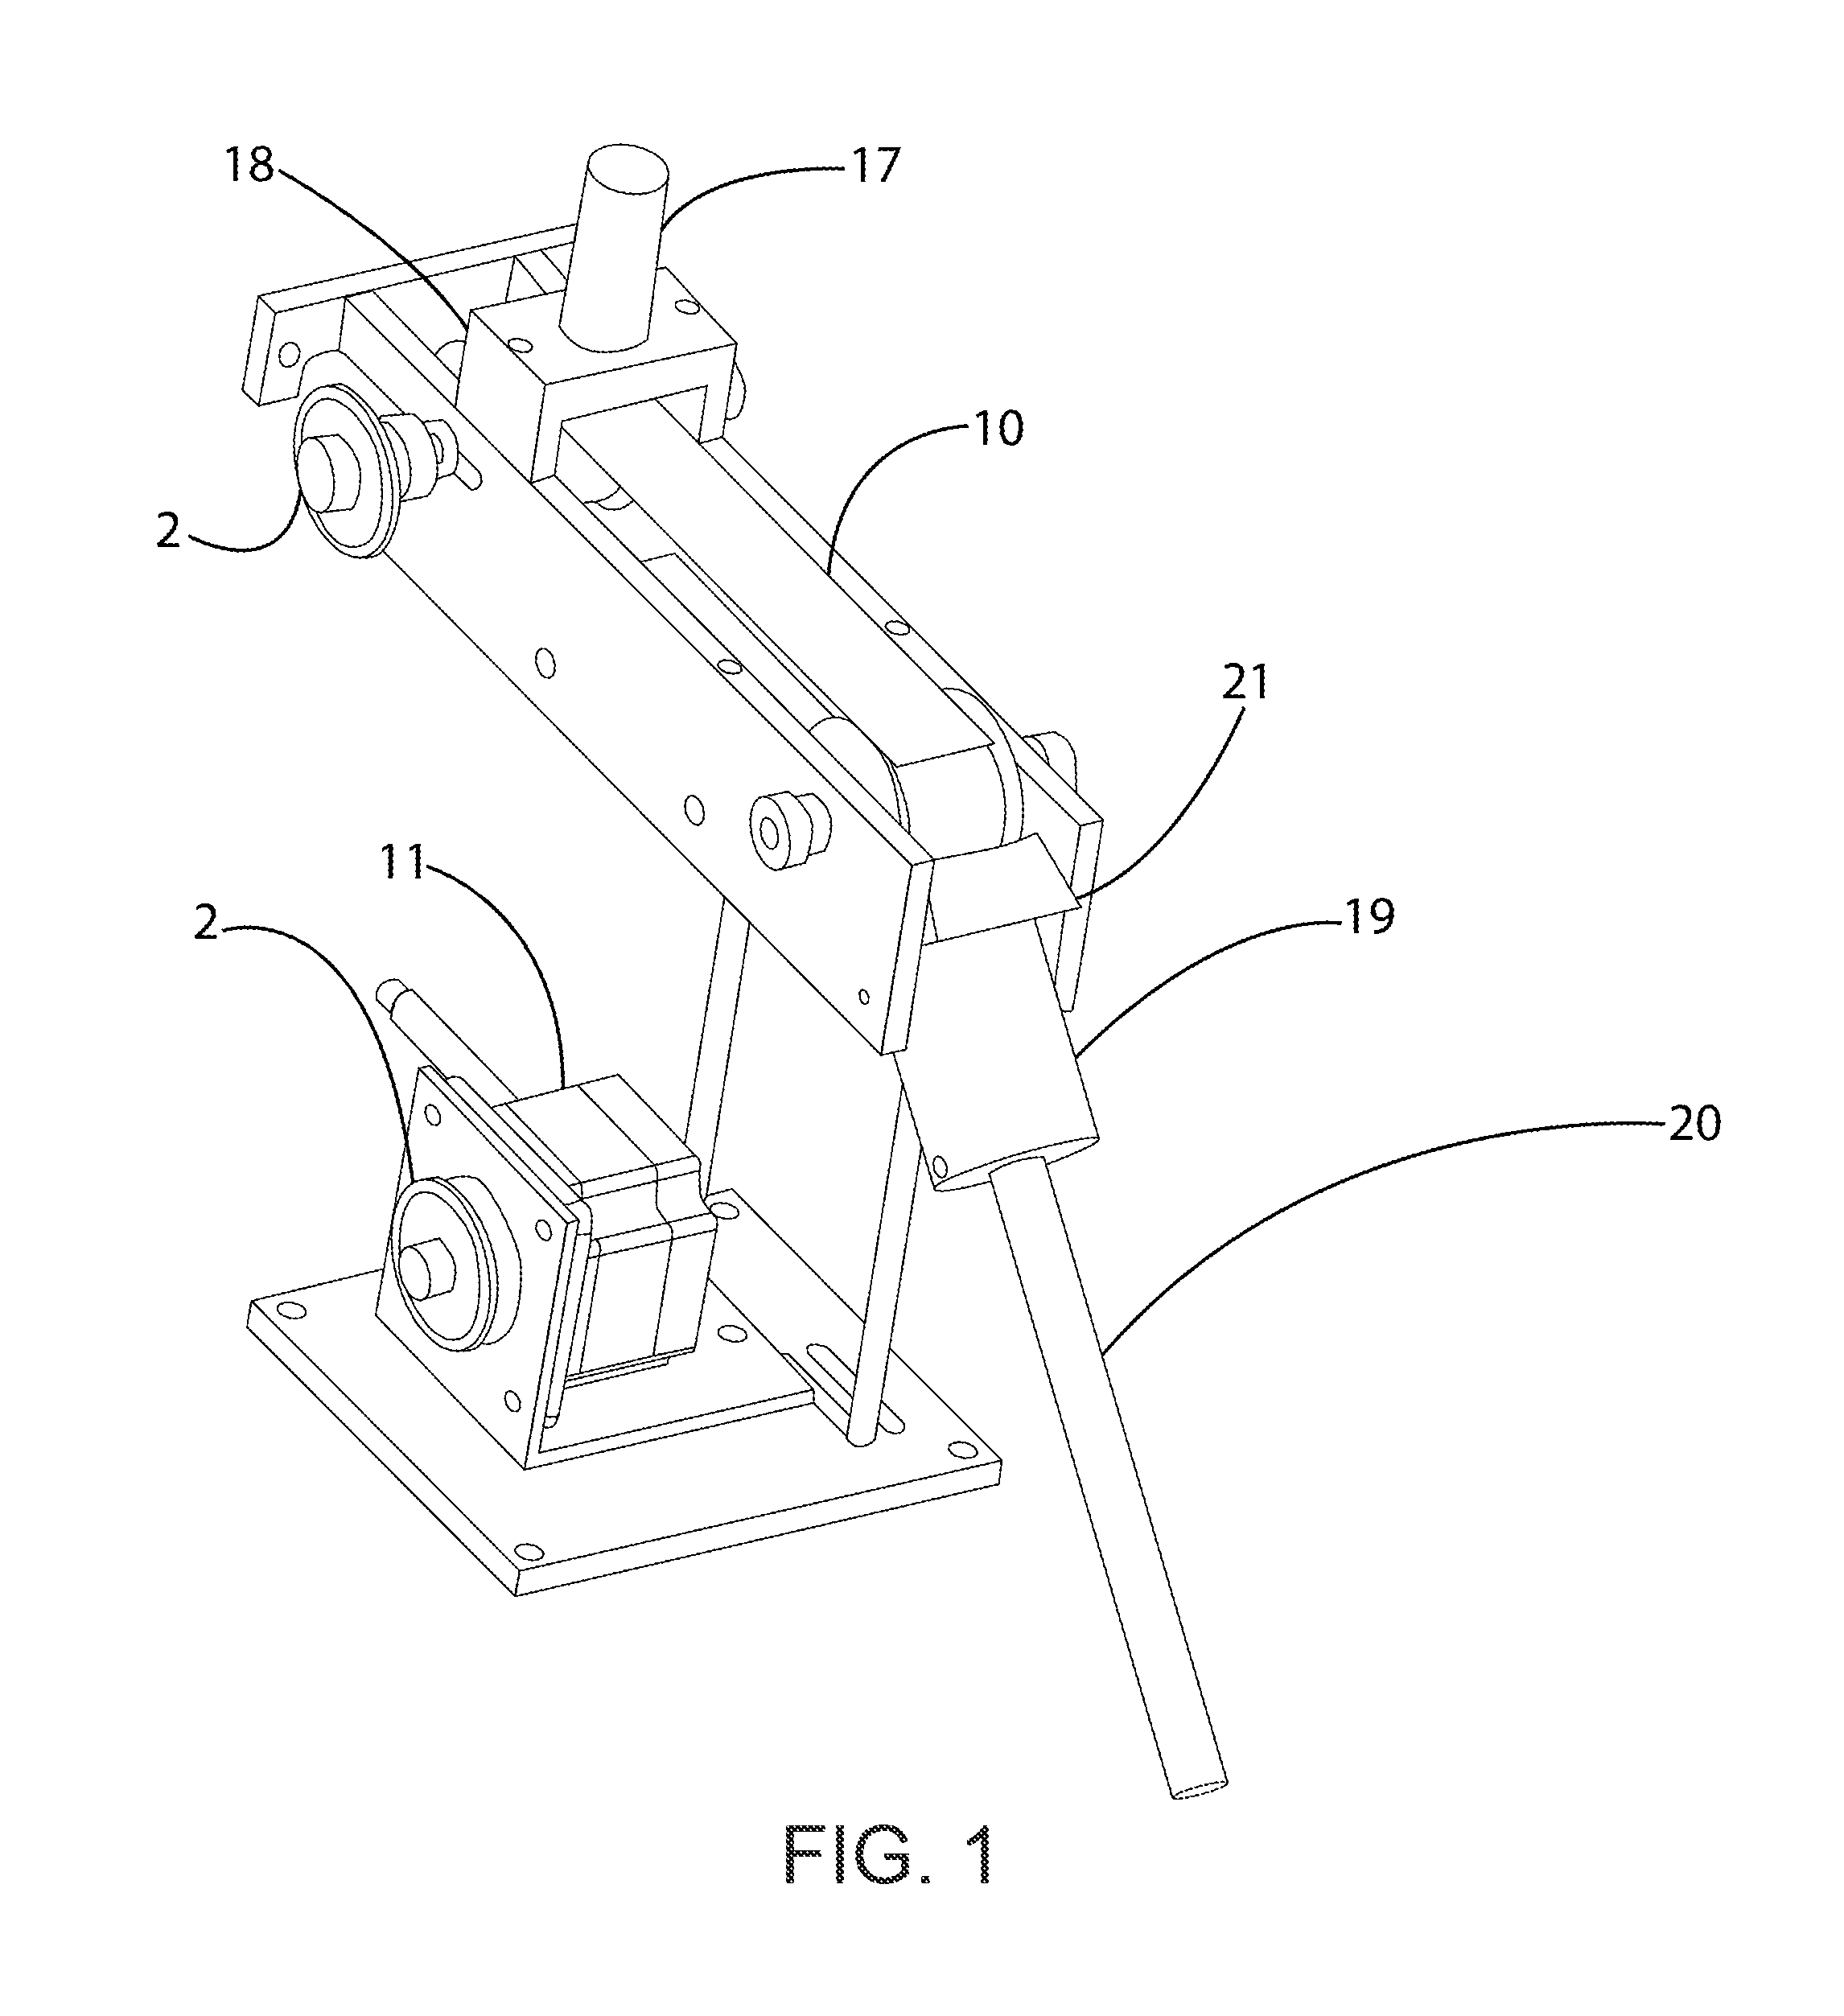 High throughput physical vapor deposition apparatus and method for manufacture of solid state batteries